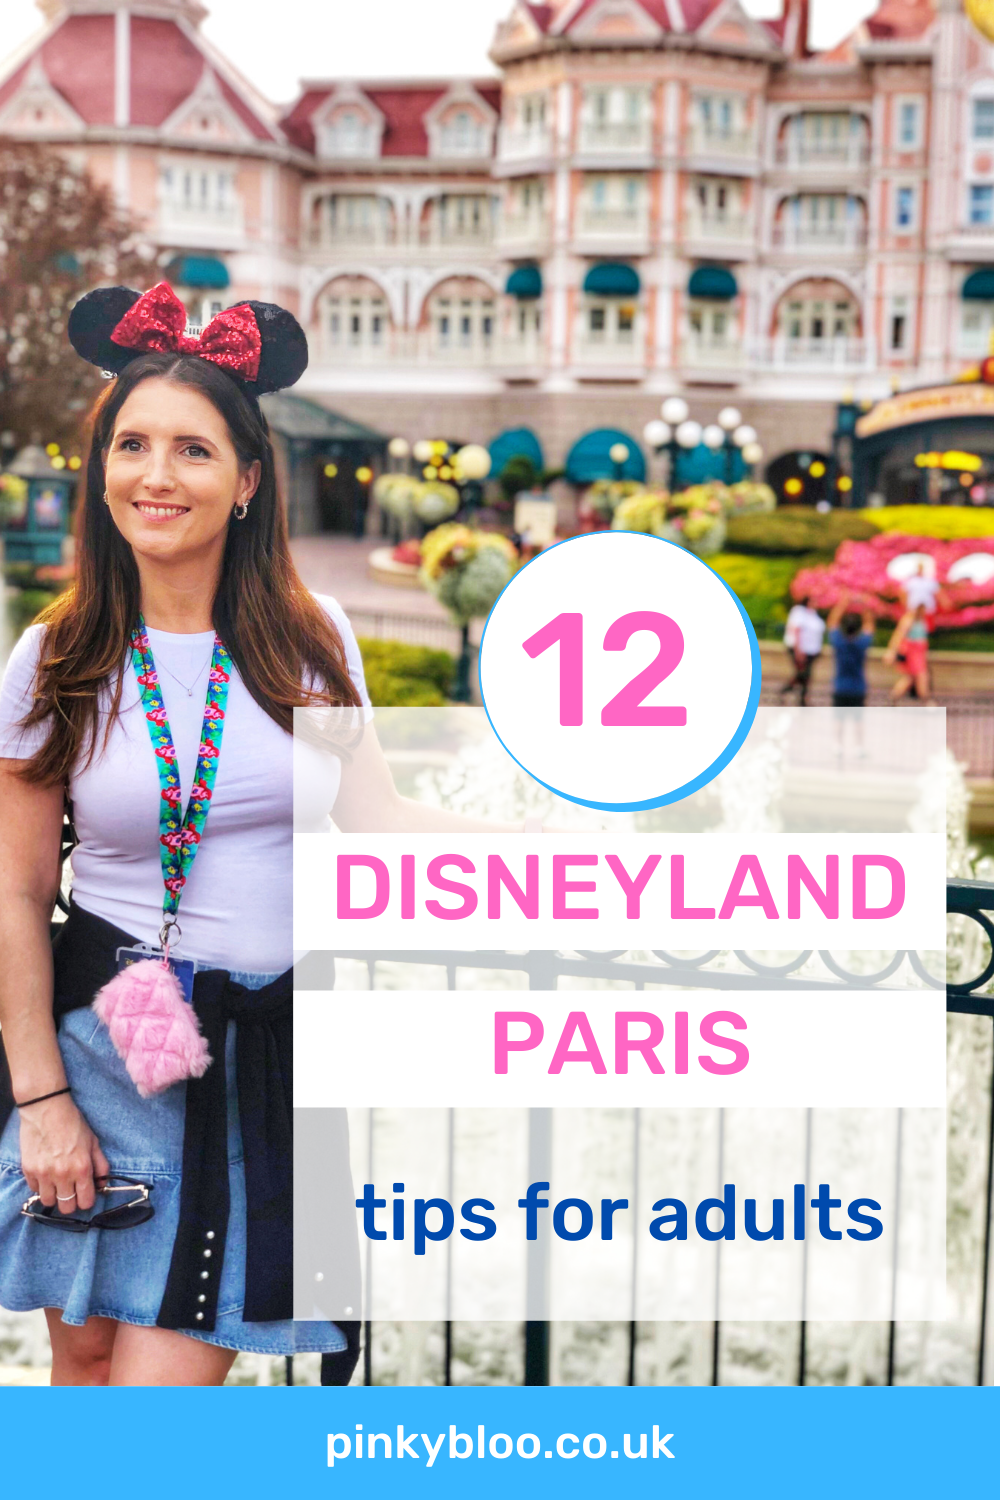 Top 7 Tips for First-Timers Visiting Disneyland Paris